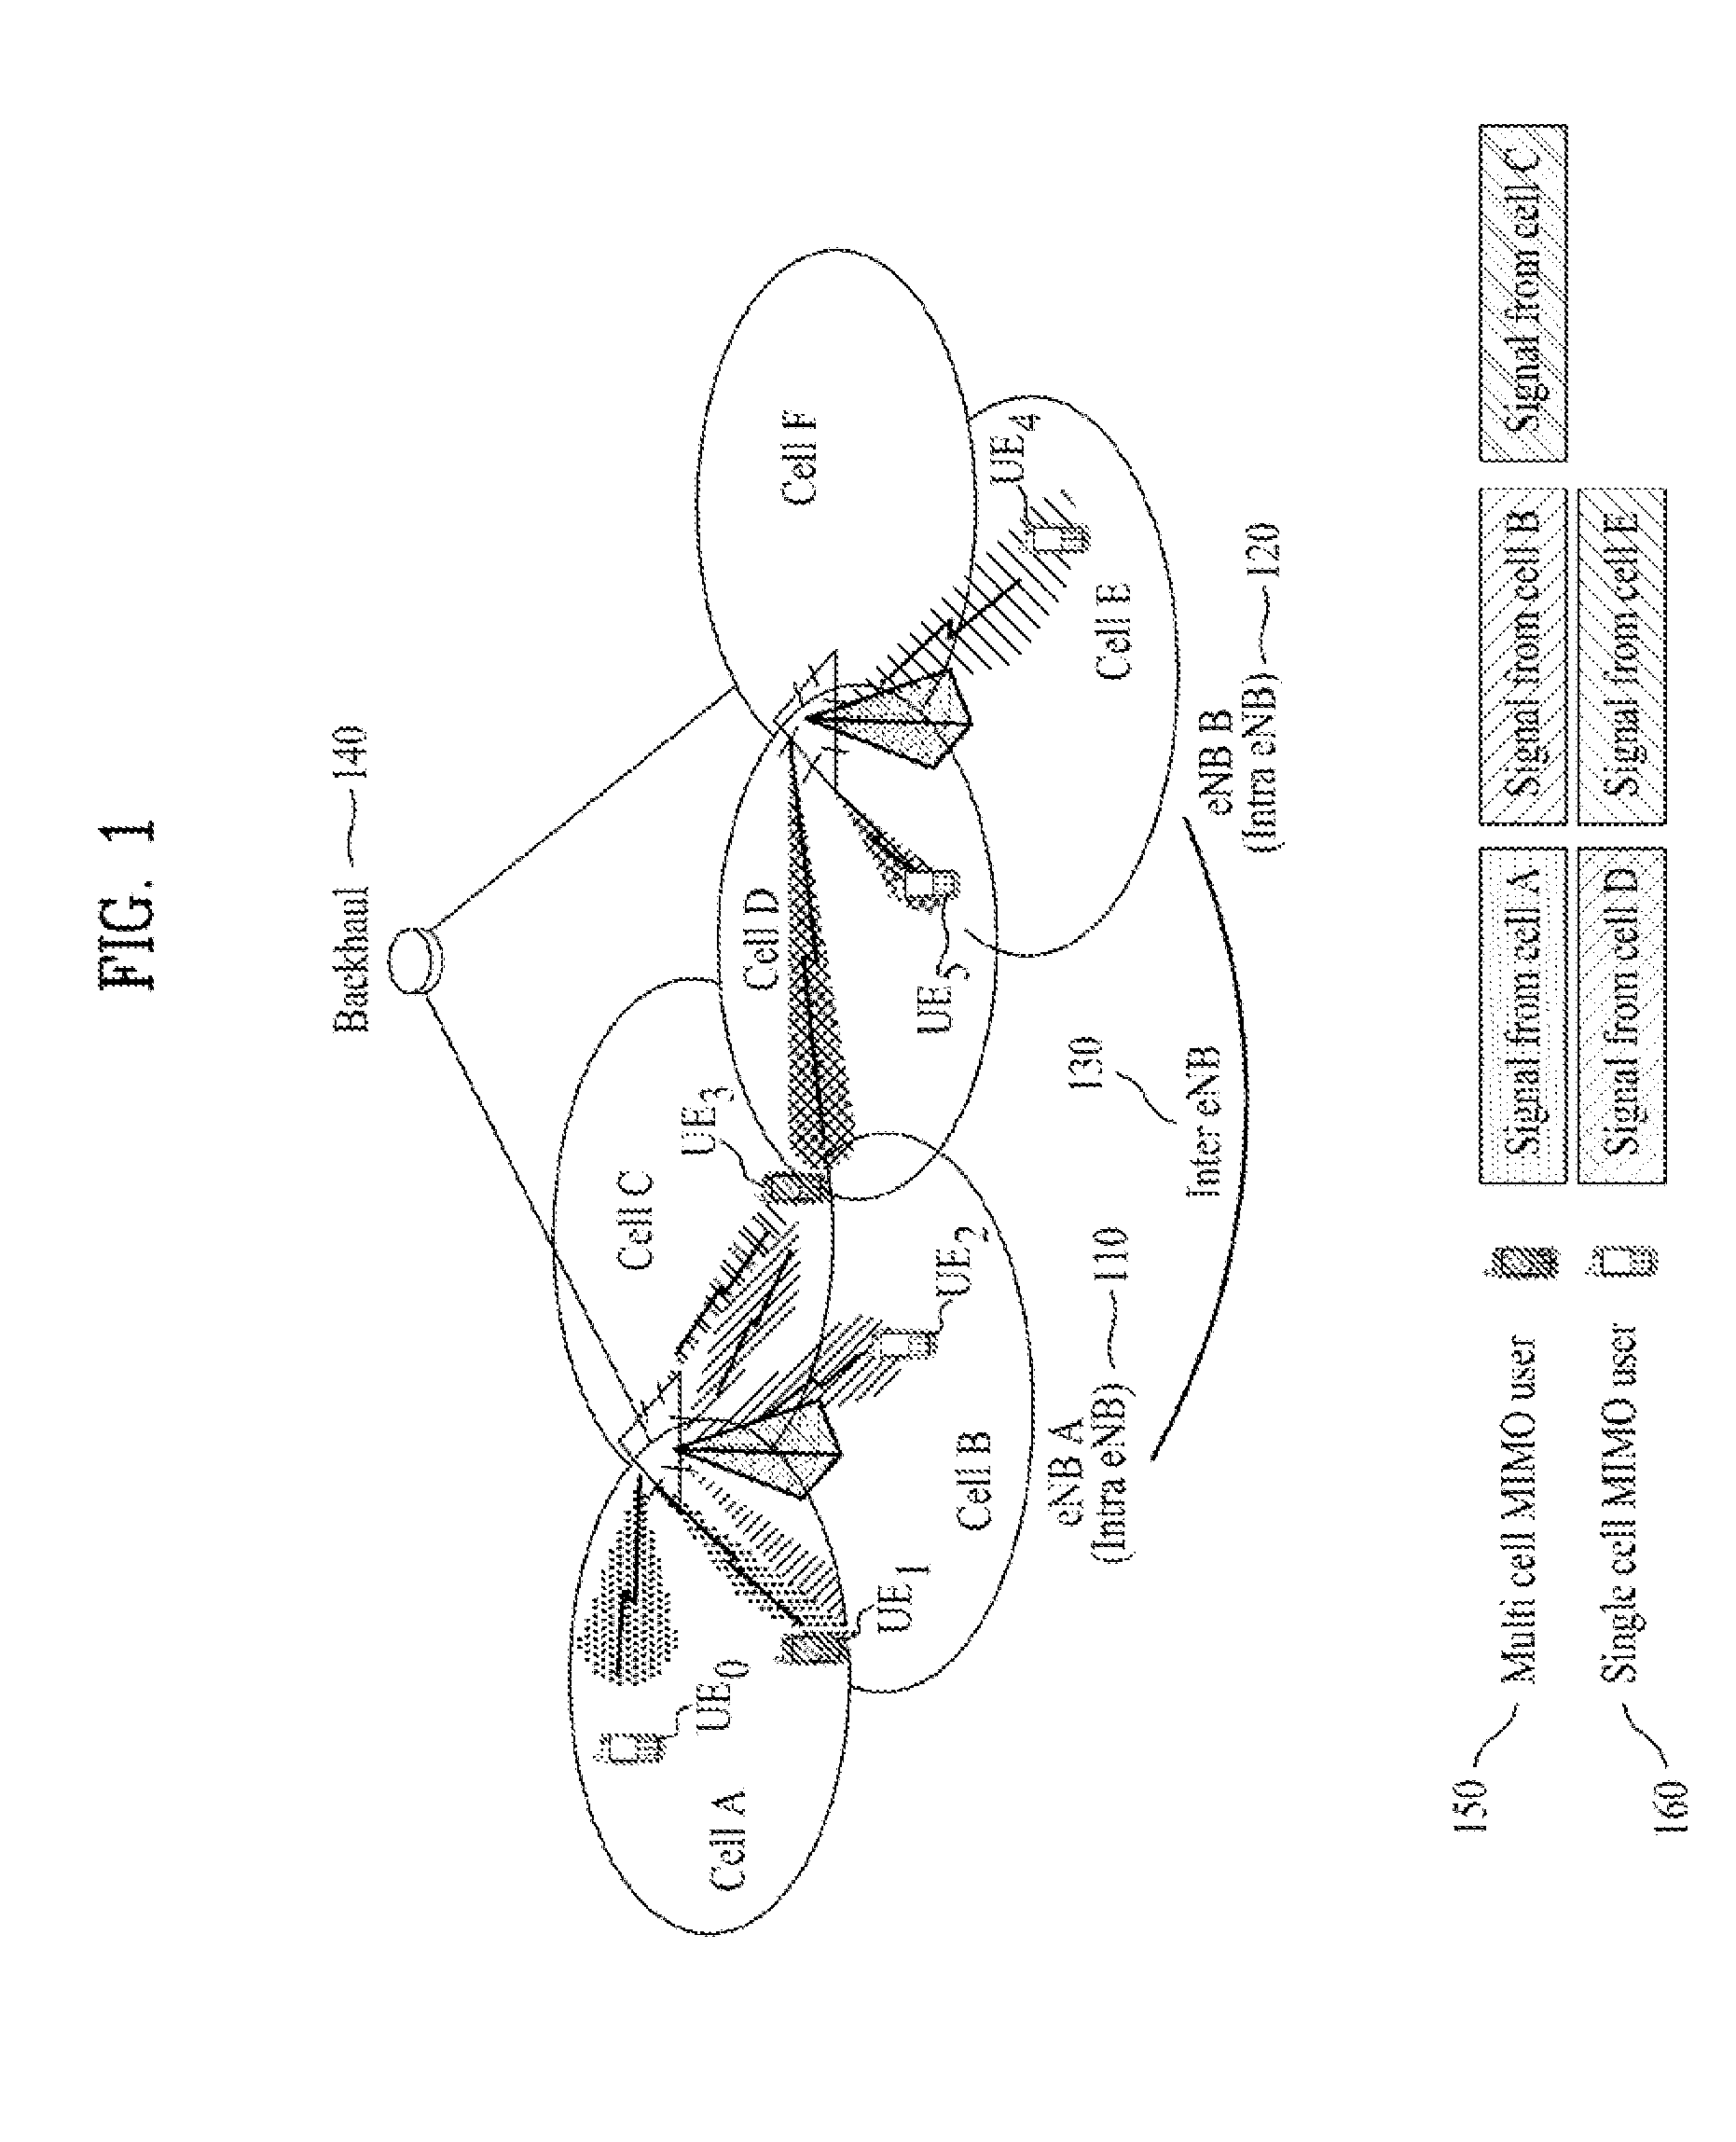 Method for transmitting channel quality information, user equipment, method for transmitting multi-user data, and base station